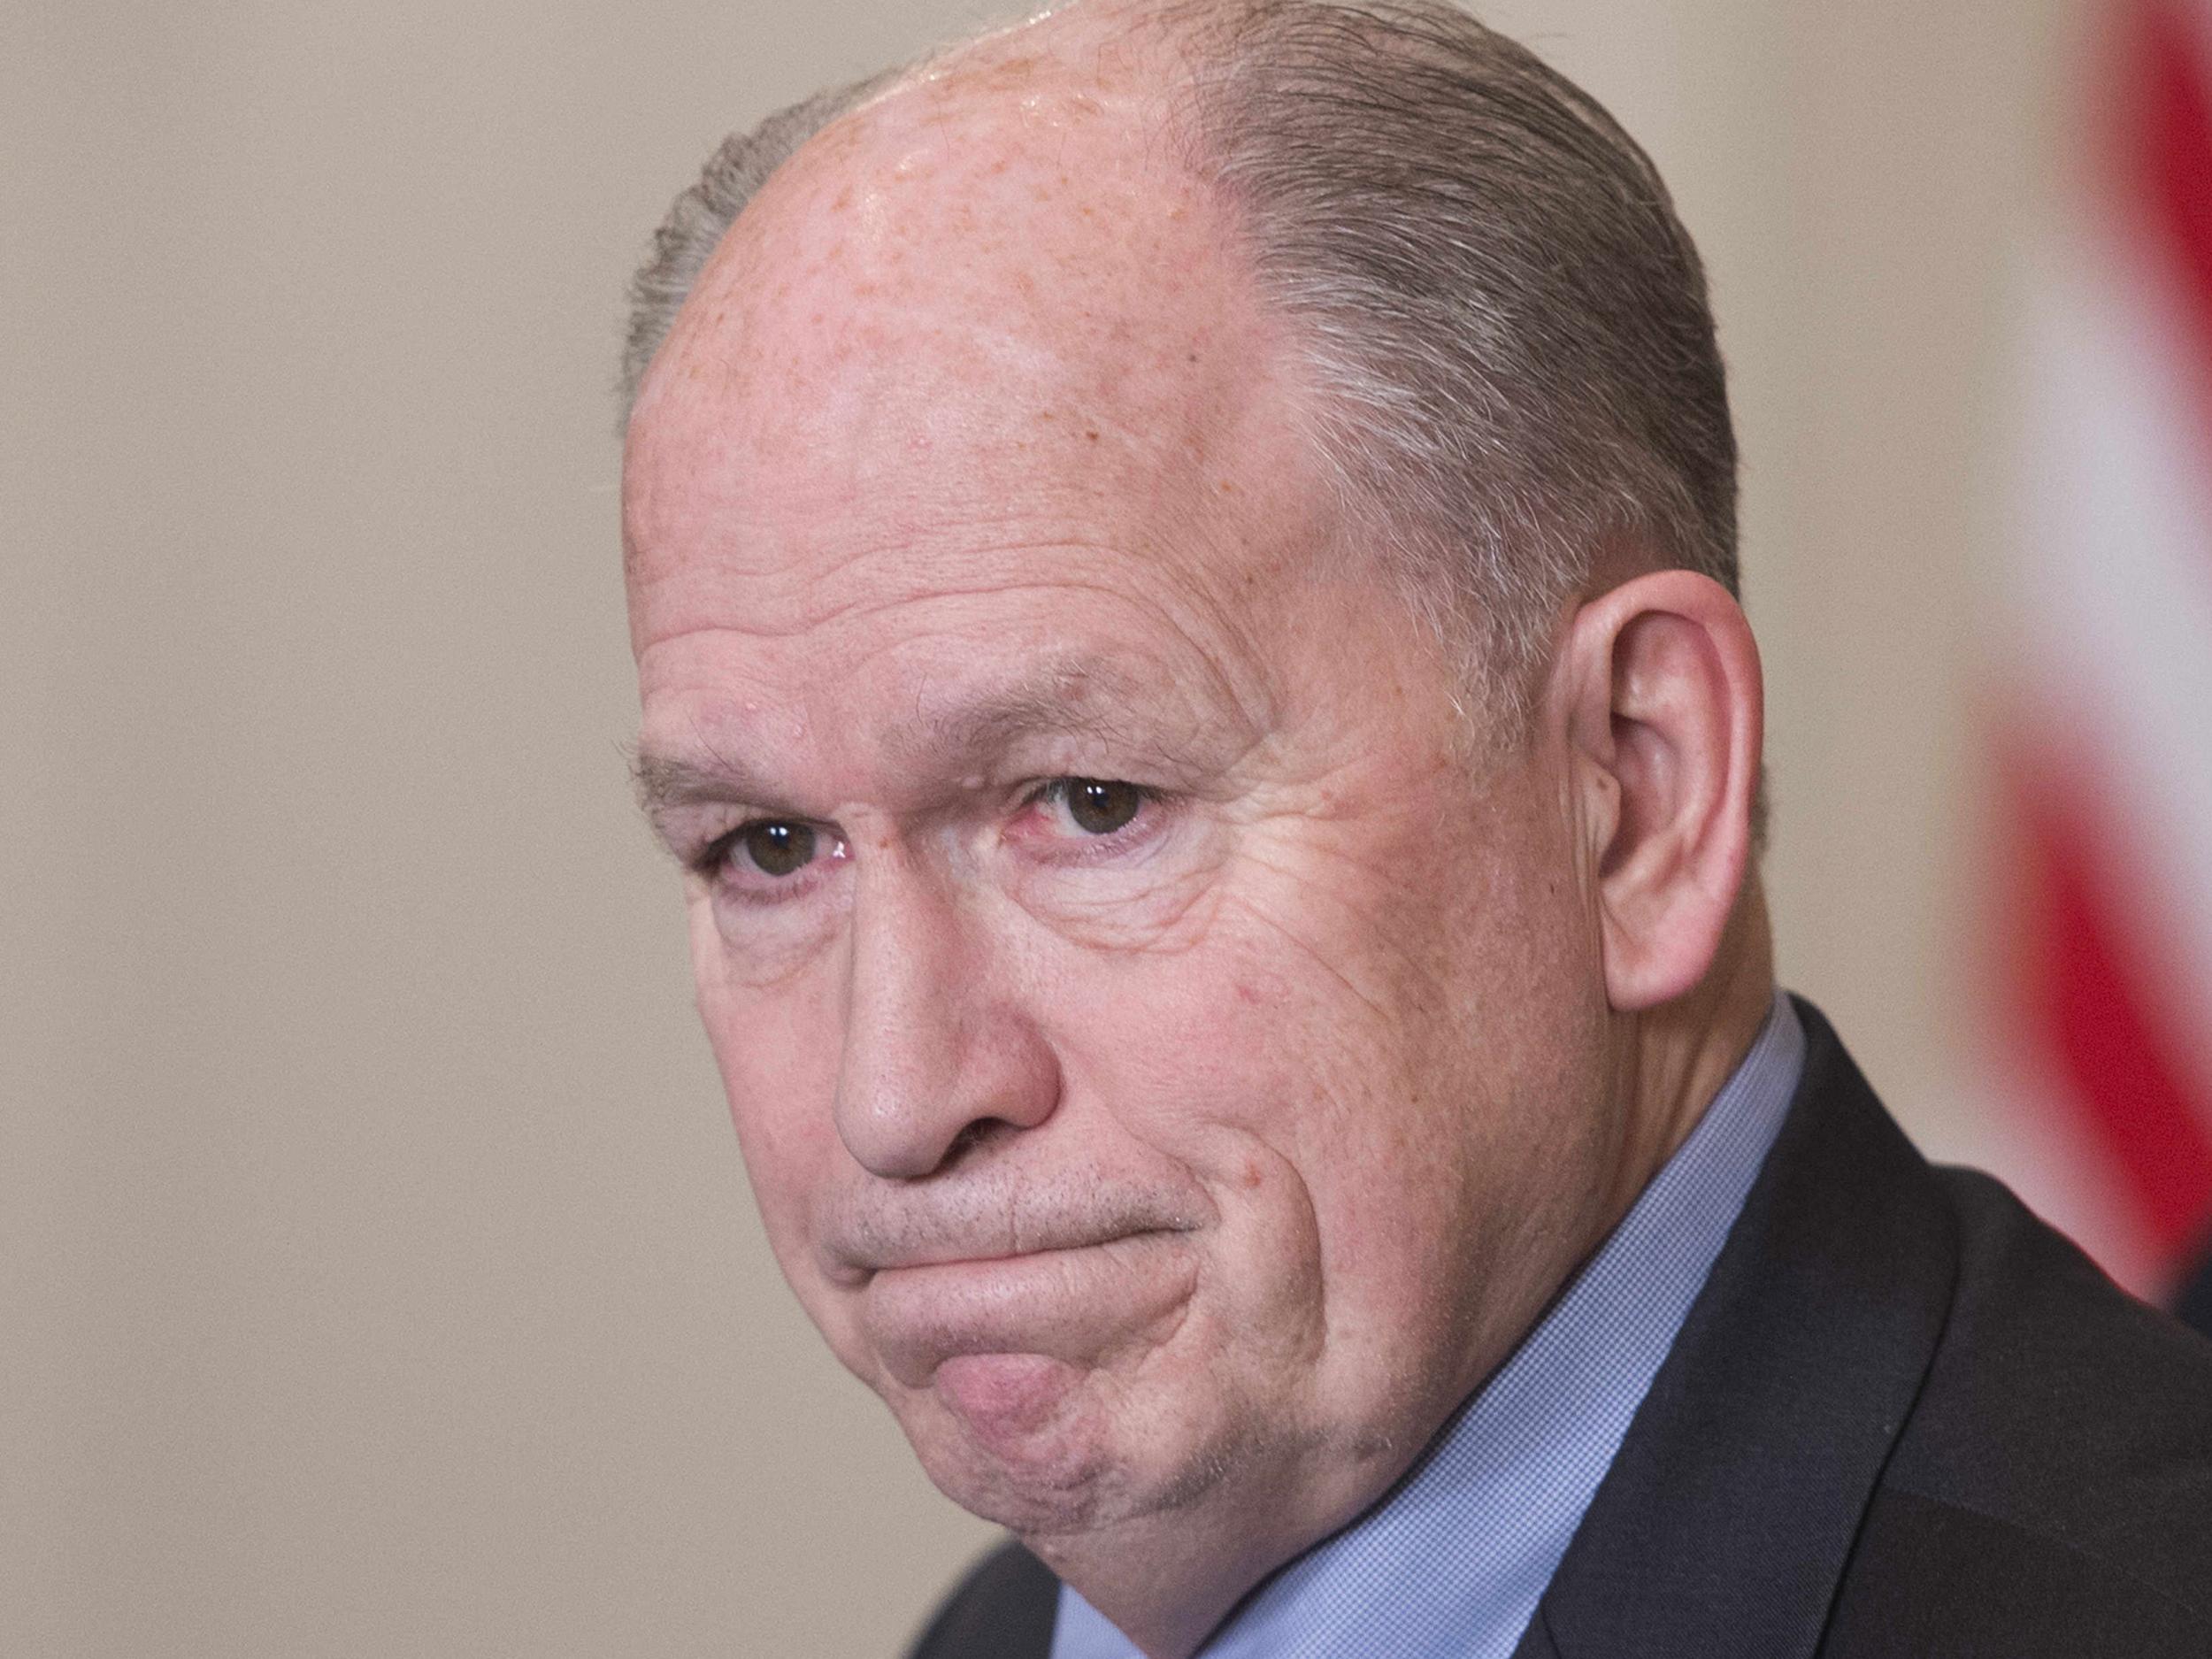 Alaska Governor Bill Walker during a meeting of the National Governors Association at the White House in Washington